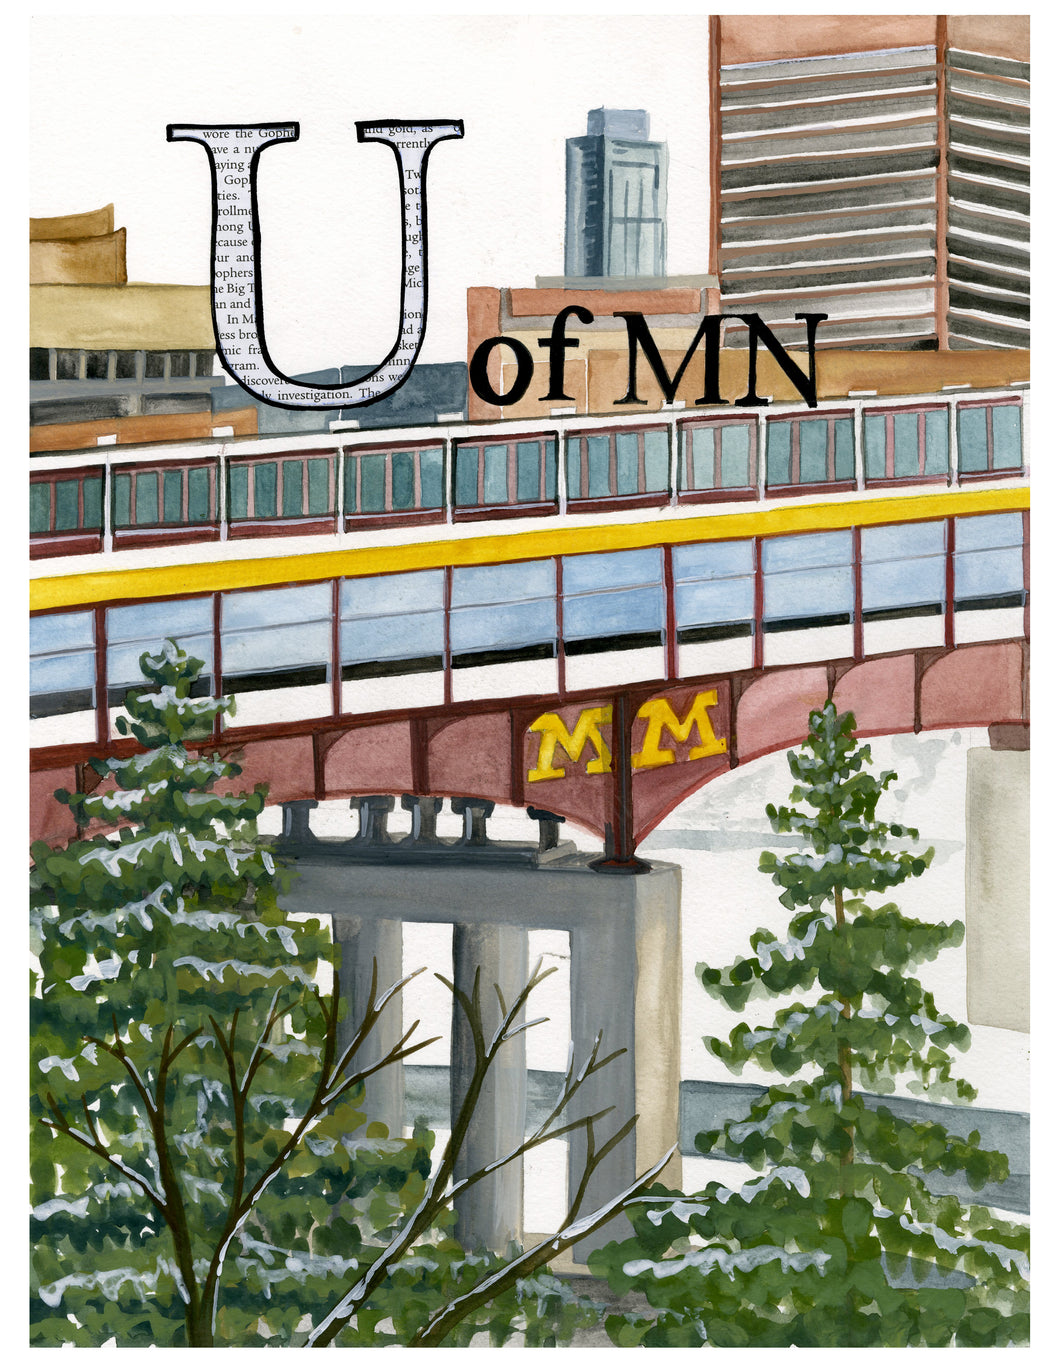 U is for the U of MN